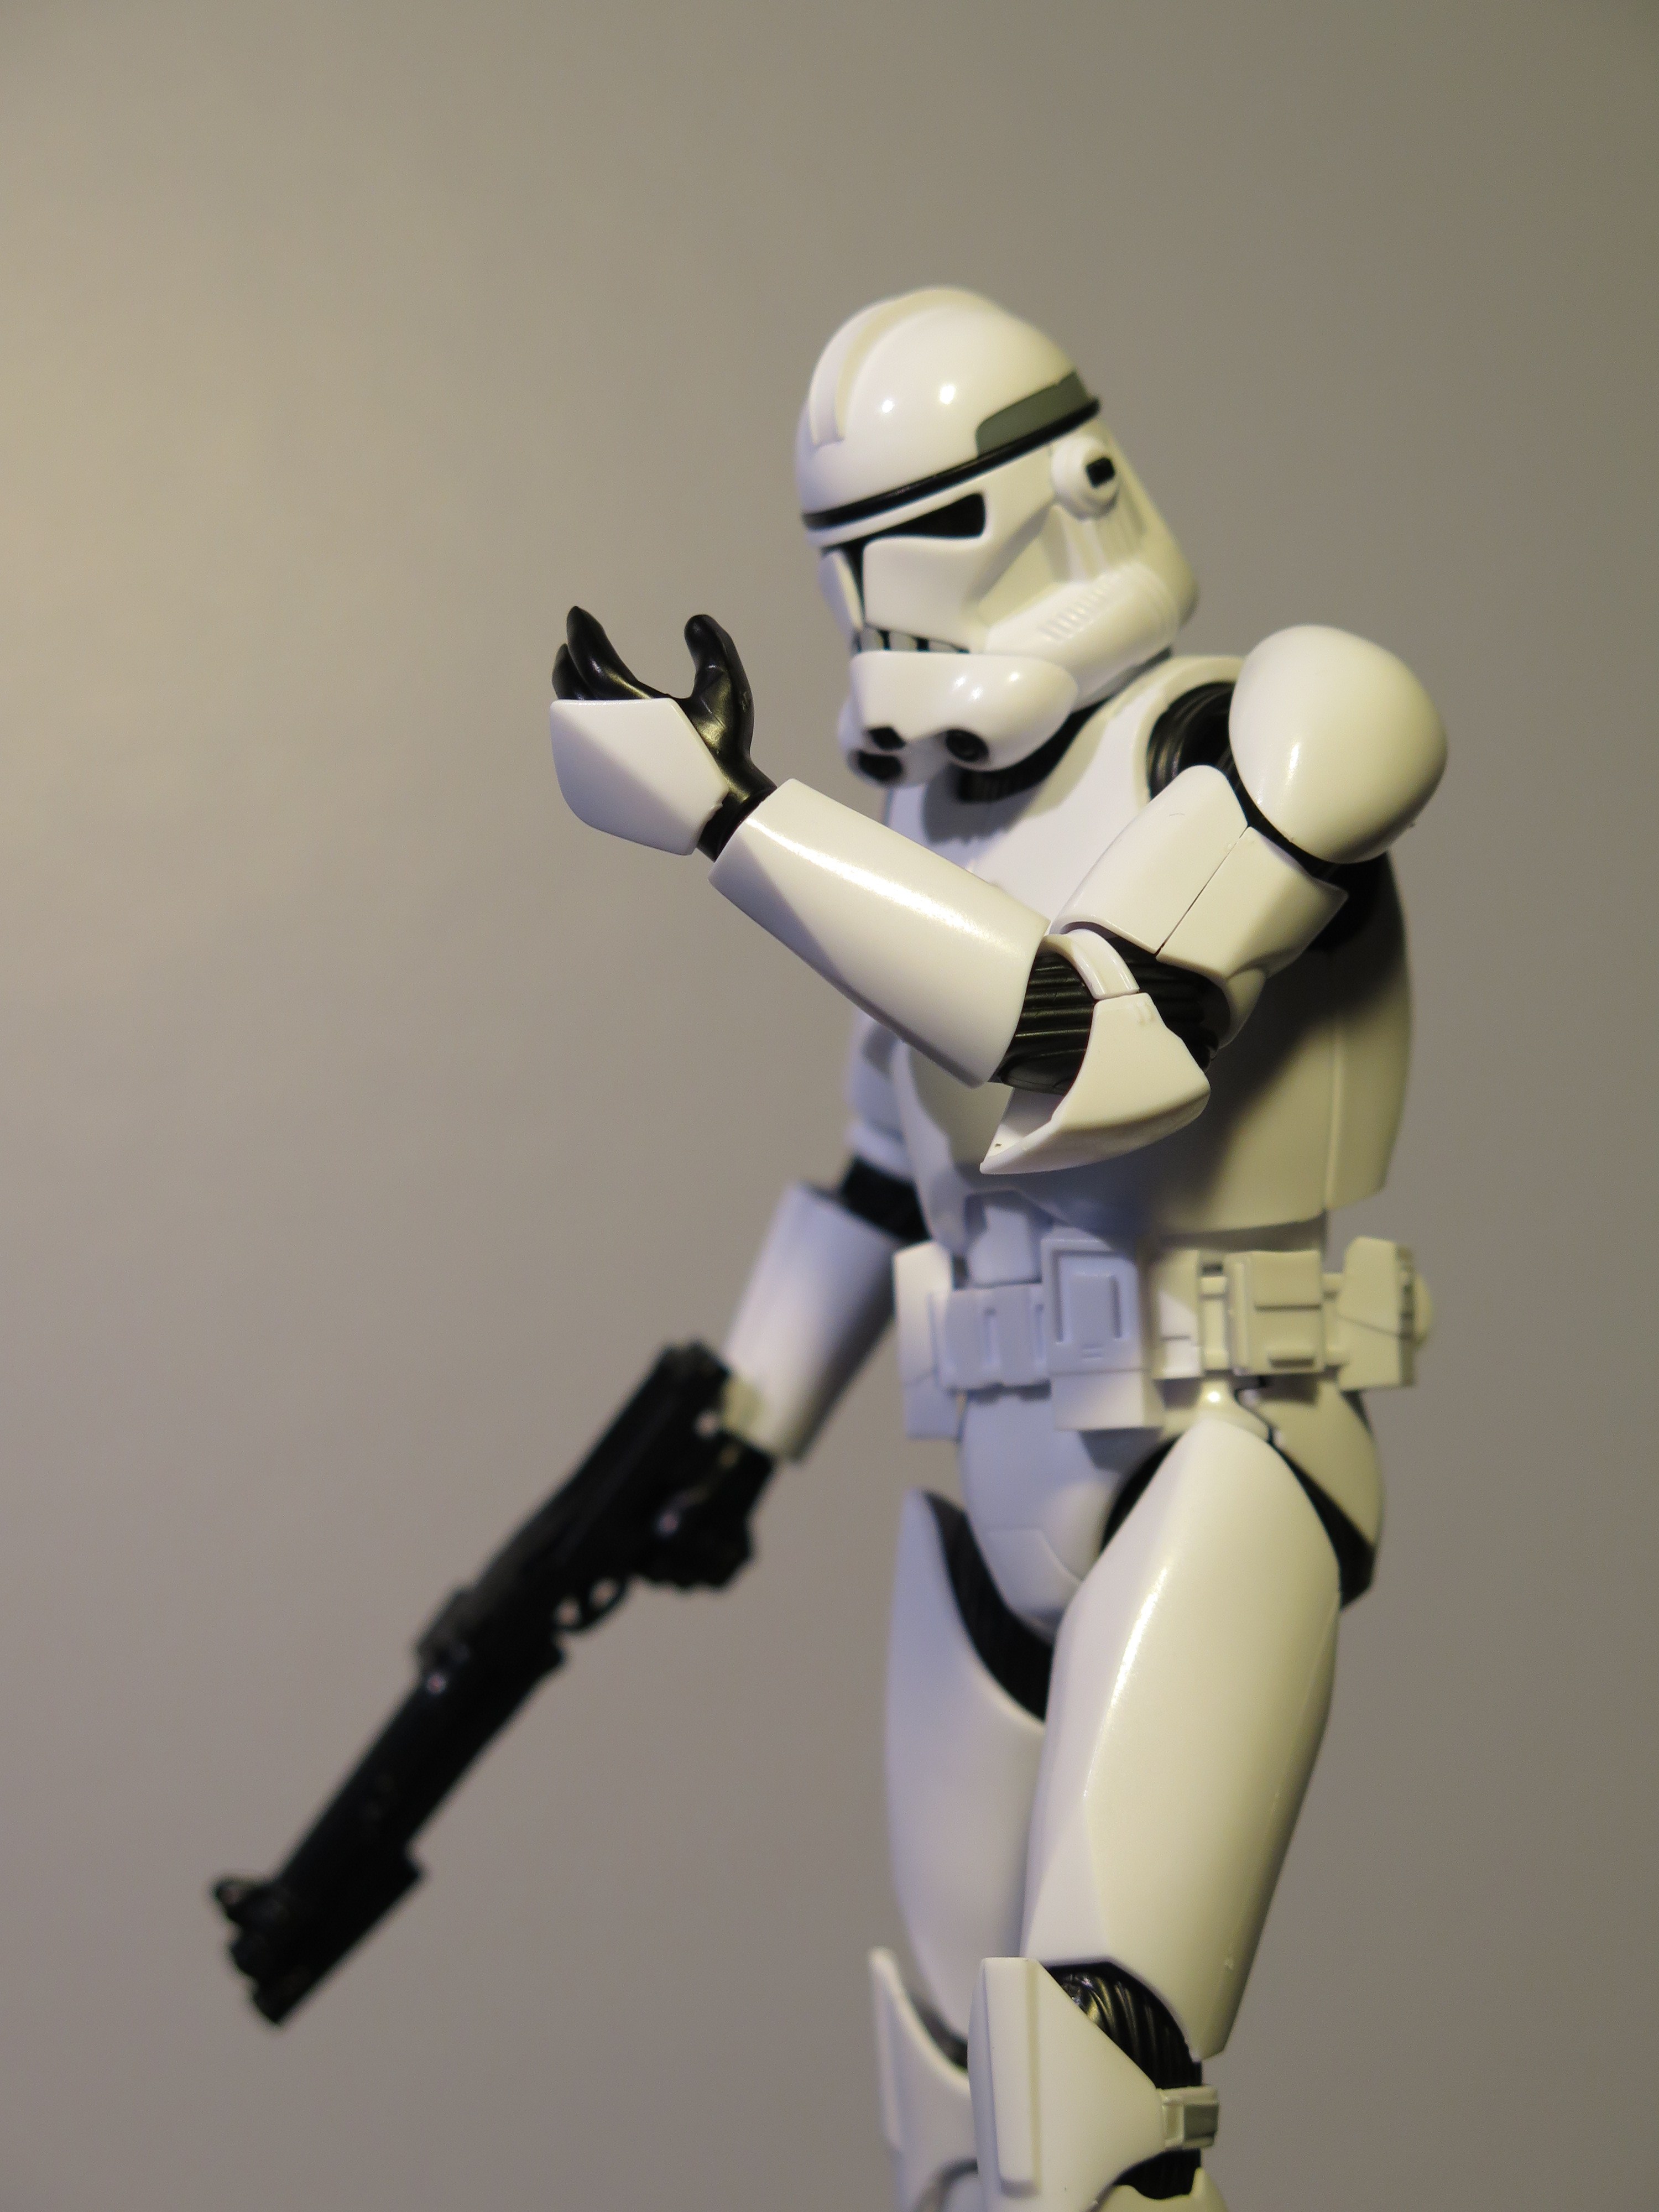 BAN207574 for sale online Bandai Star Wars Clone Trooper 1/12 Scale Action Figure